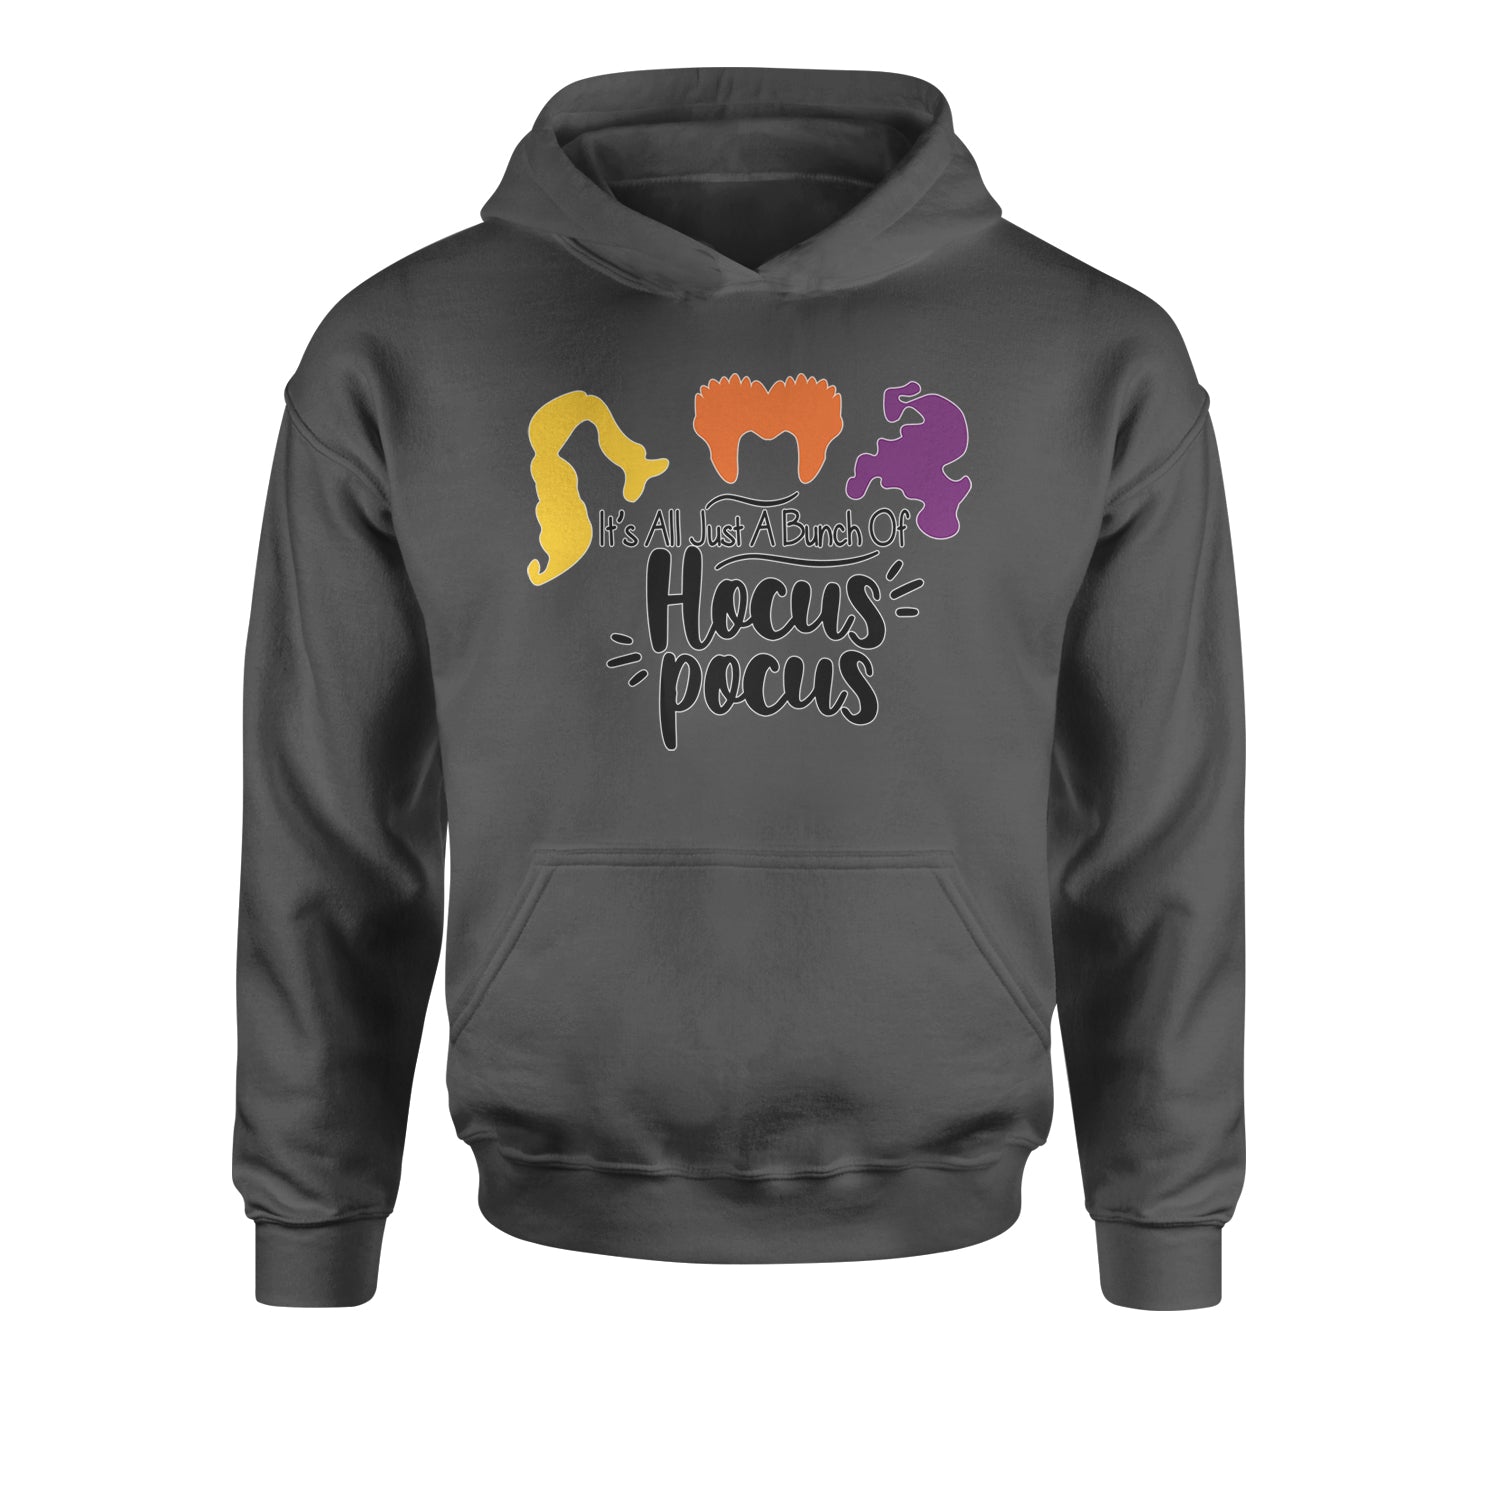 It's Just A Bunch Of Hocus Pocus Youth-Sized Hoodie descendants, enchanted, eve, hallows, hocus, or, pocus, sanderson, sisters, treat, trick, witches by Expression Tees